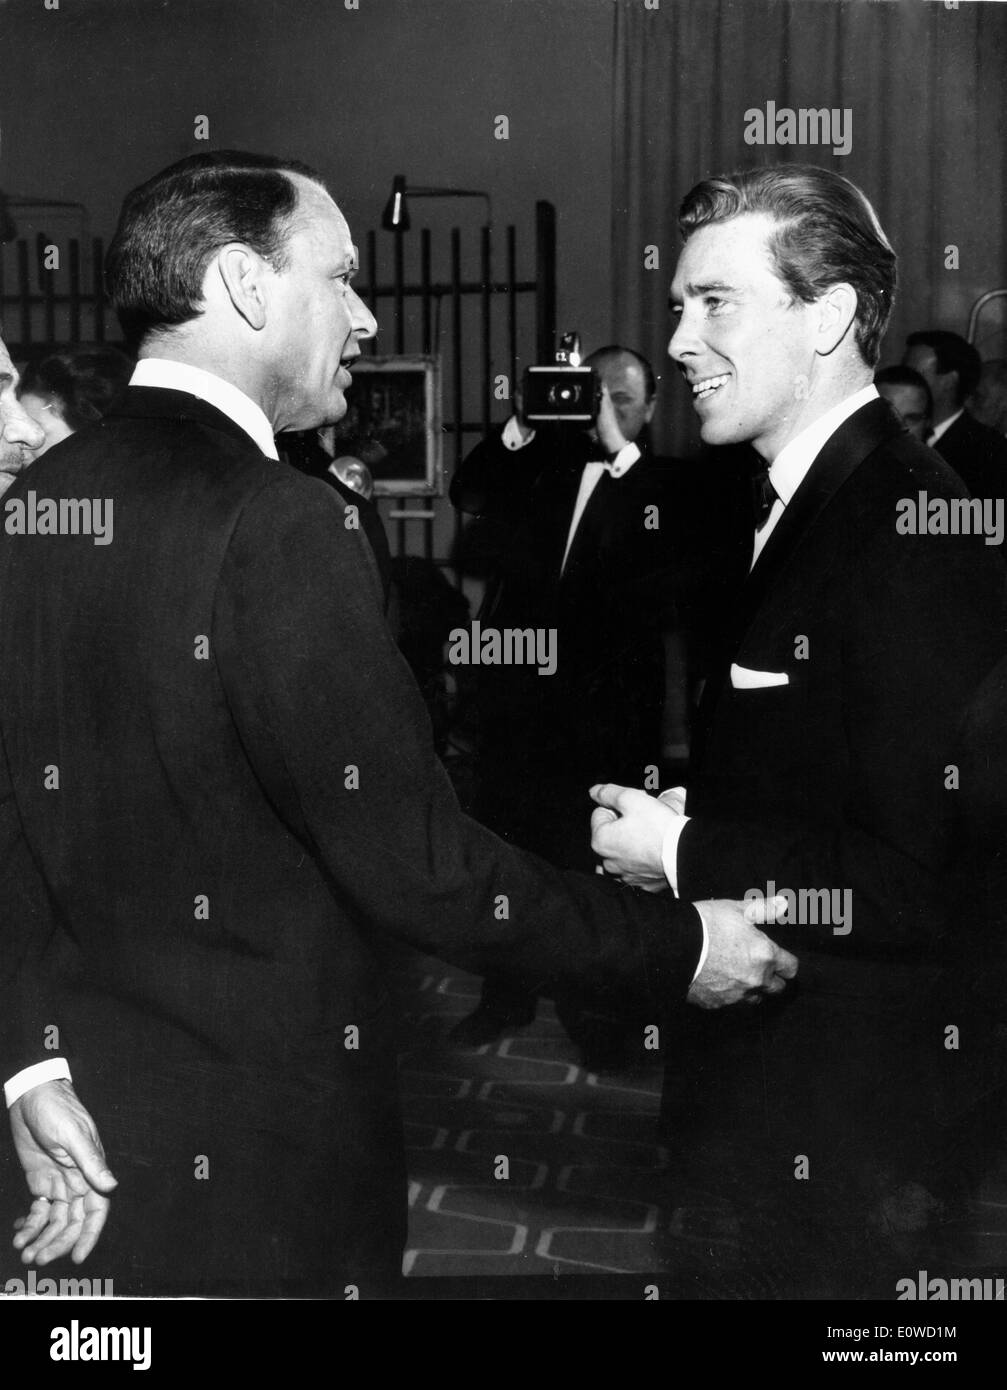 Singer Frank Sinatra talking with Lord Snowdon before a concert Stock Photo